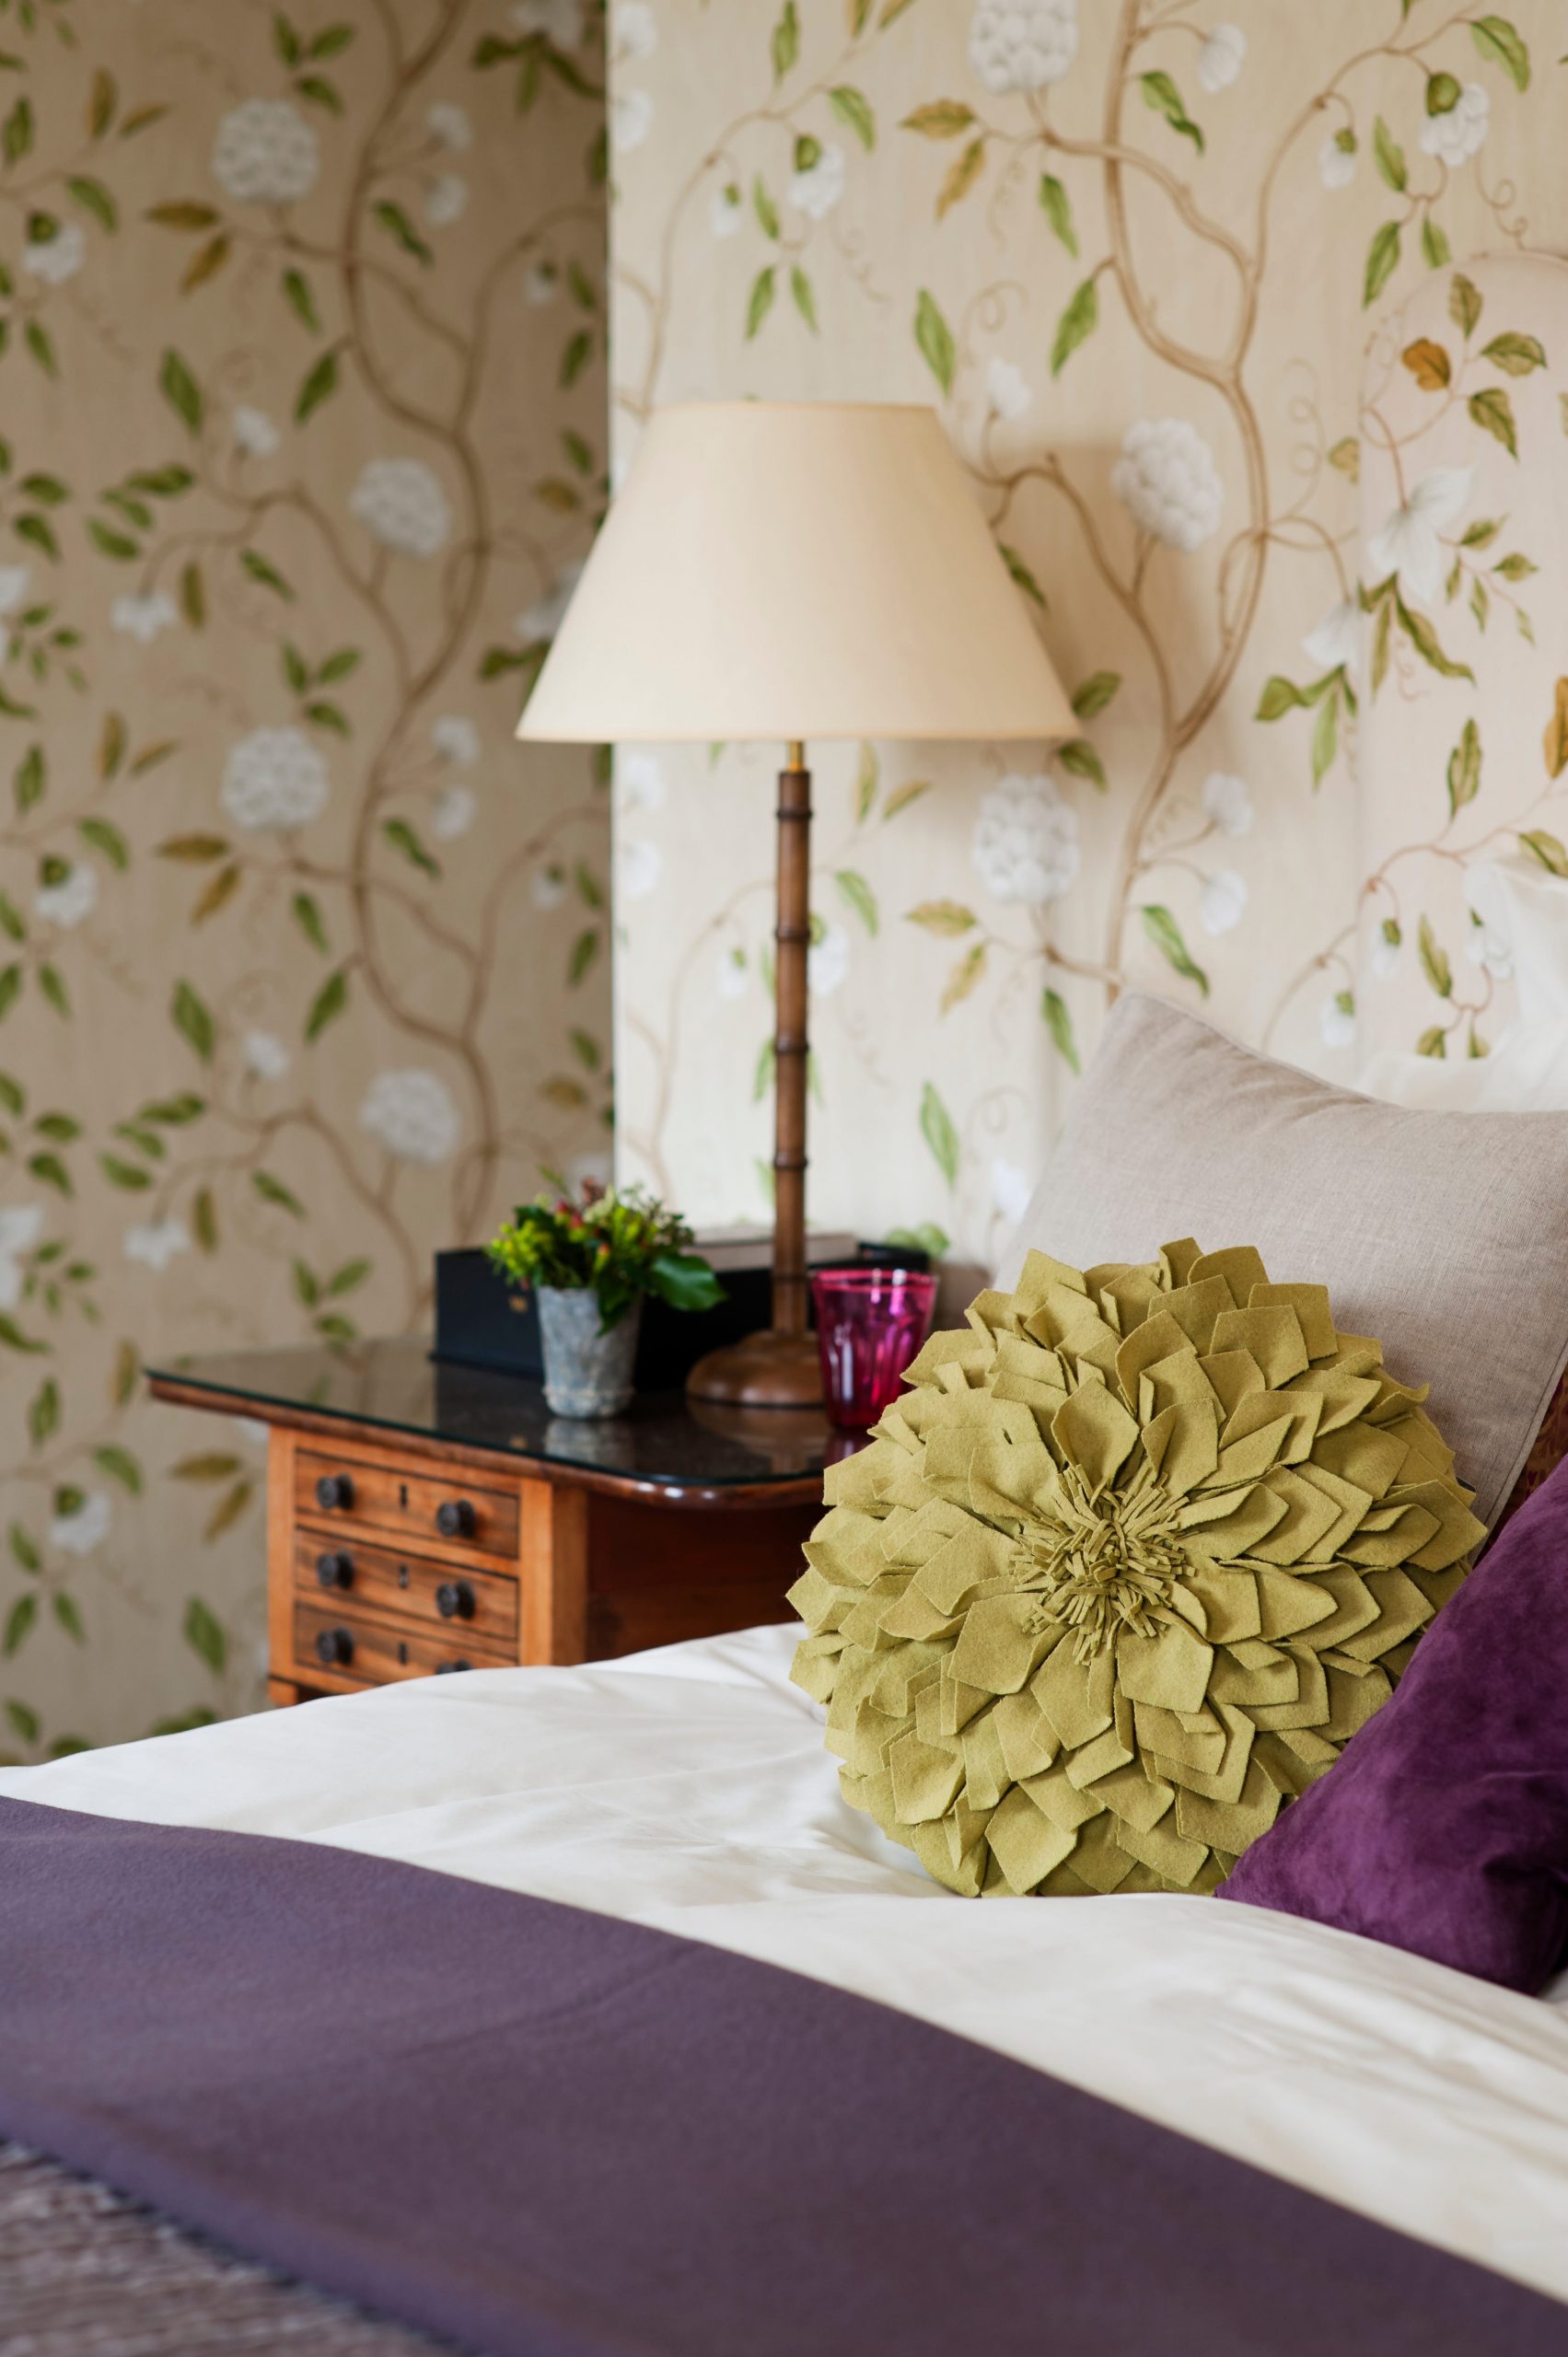 A close-up of a bed with purple linen and a gold pillow with a lamp and beige floral wallpaper in the background